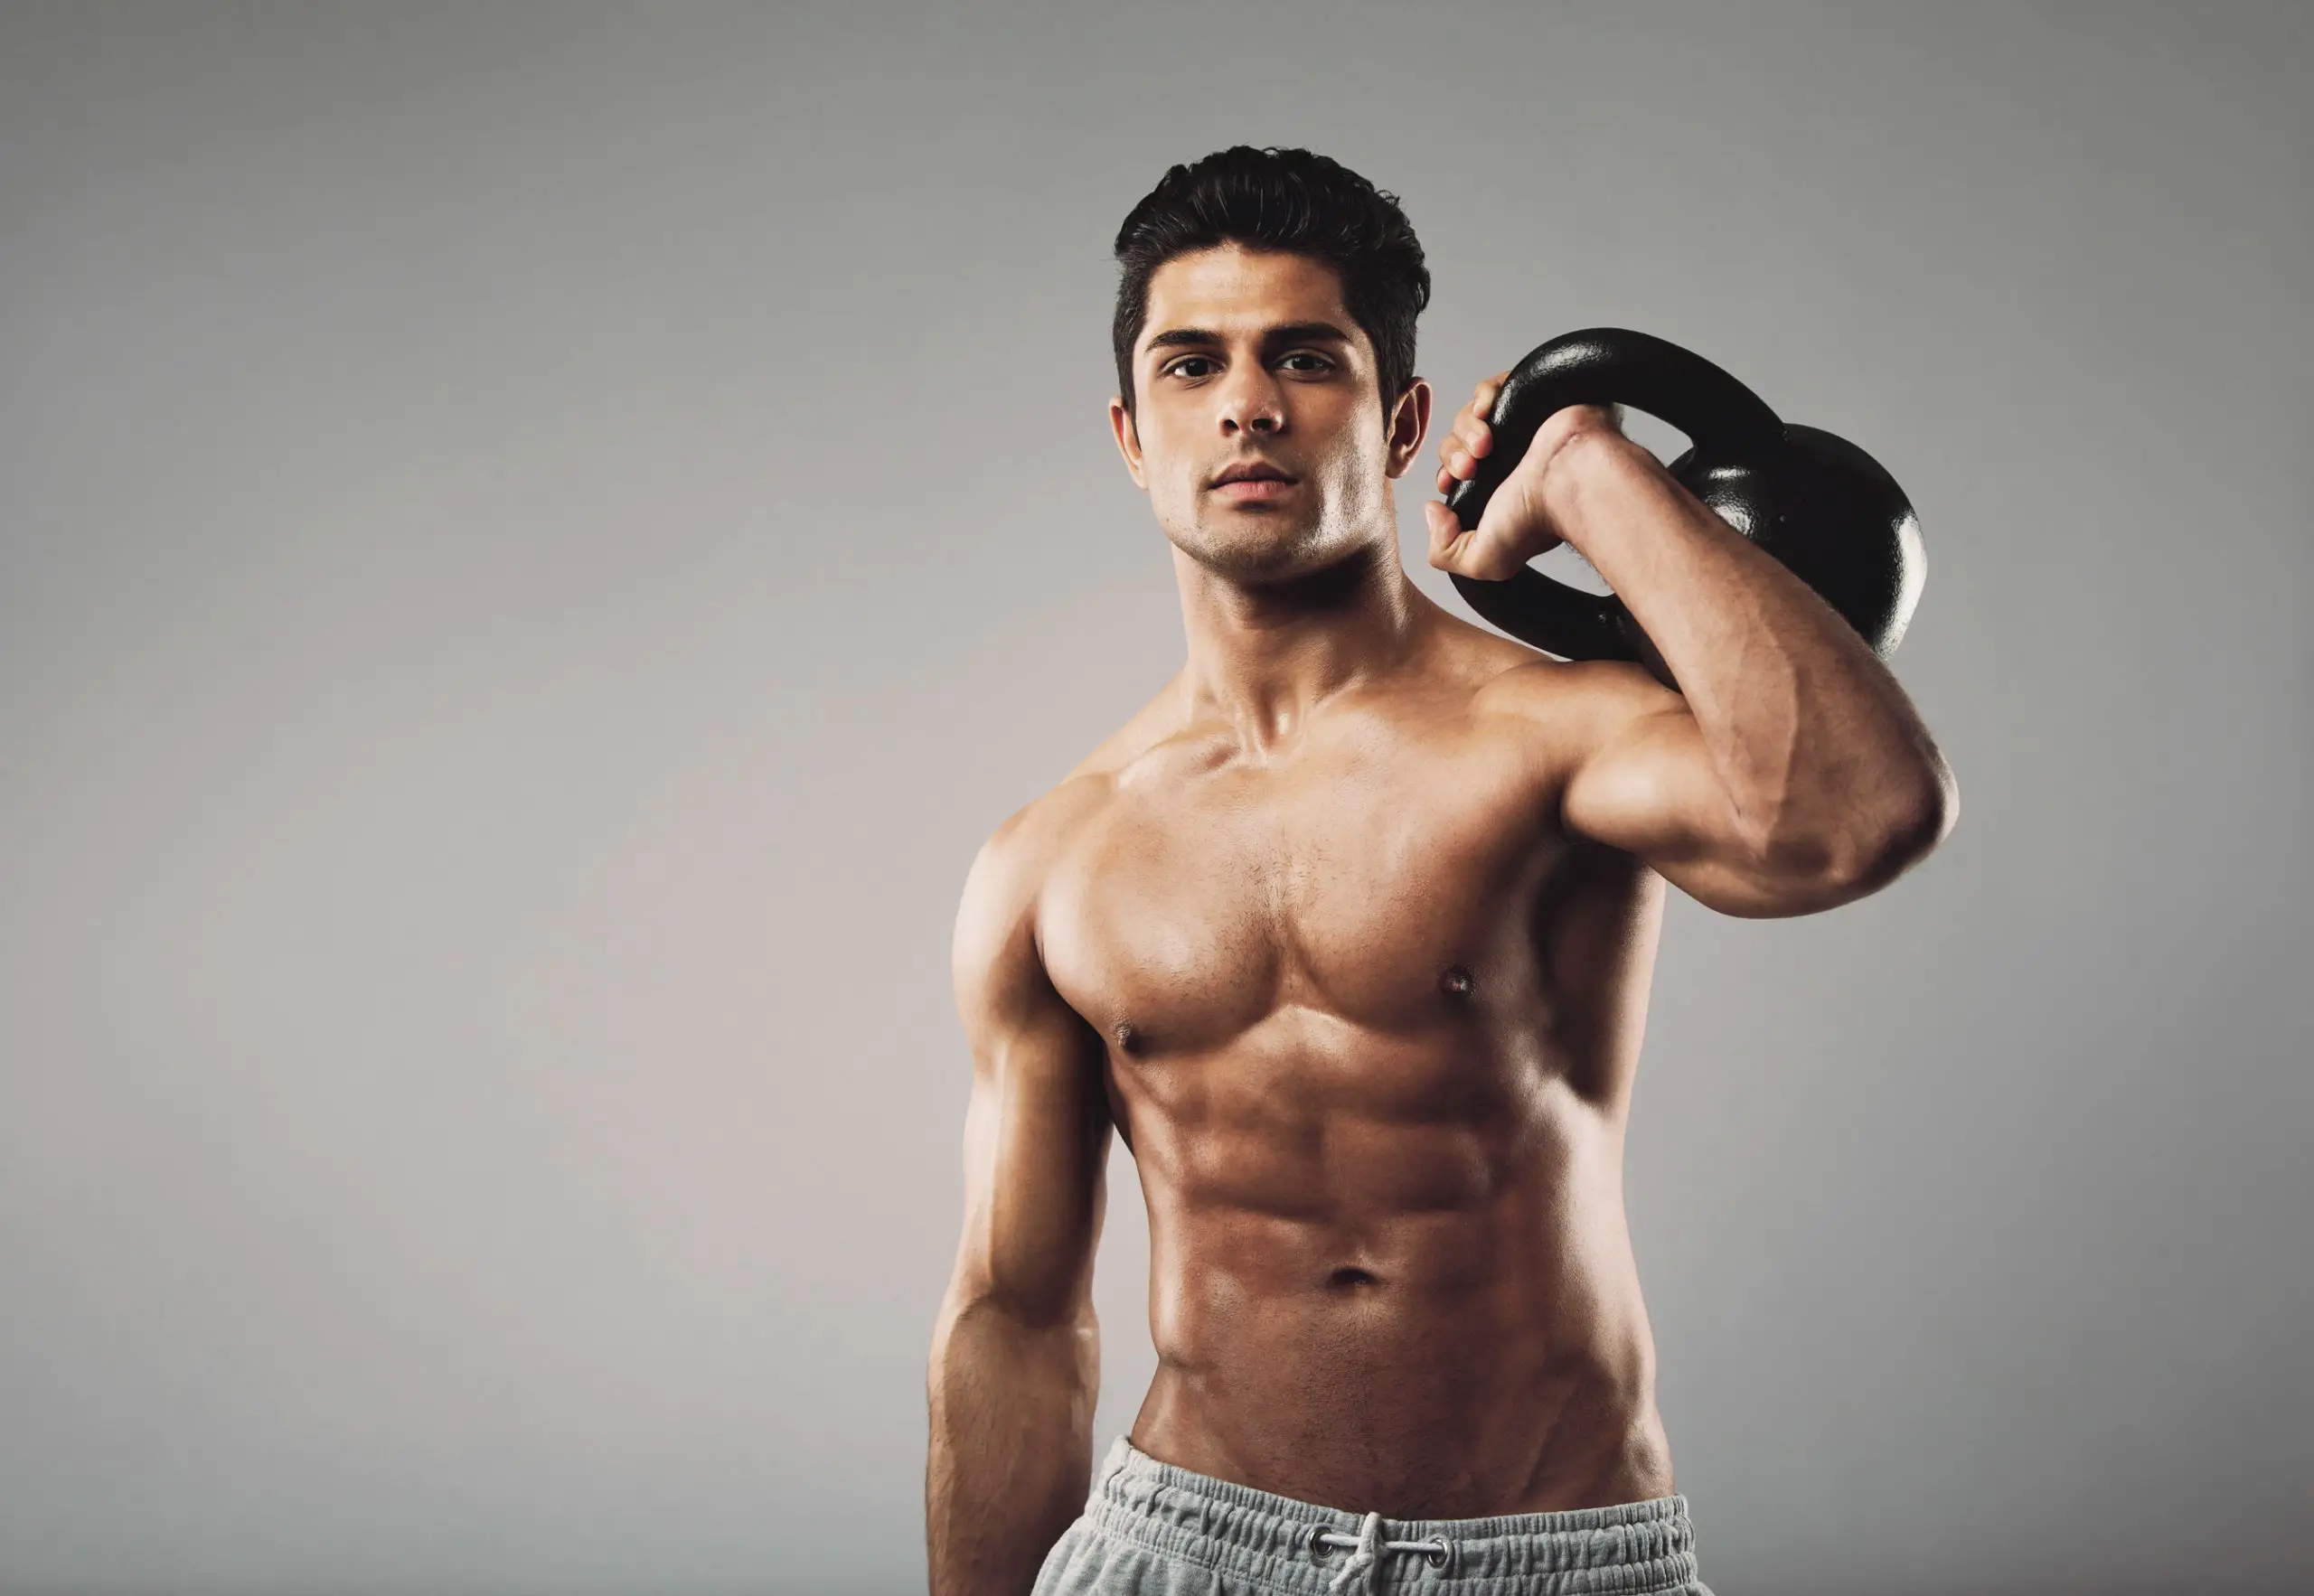 Use of kettlebells to get a six pack scaled